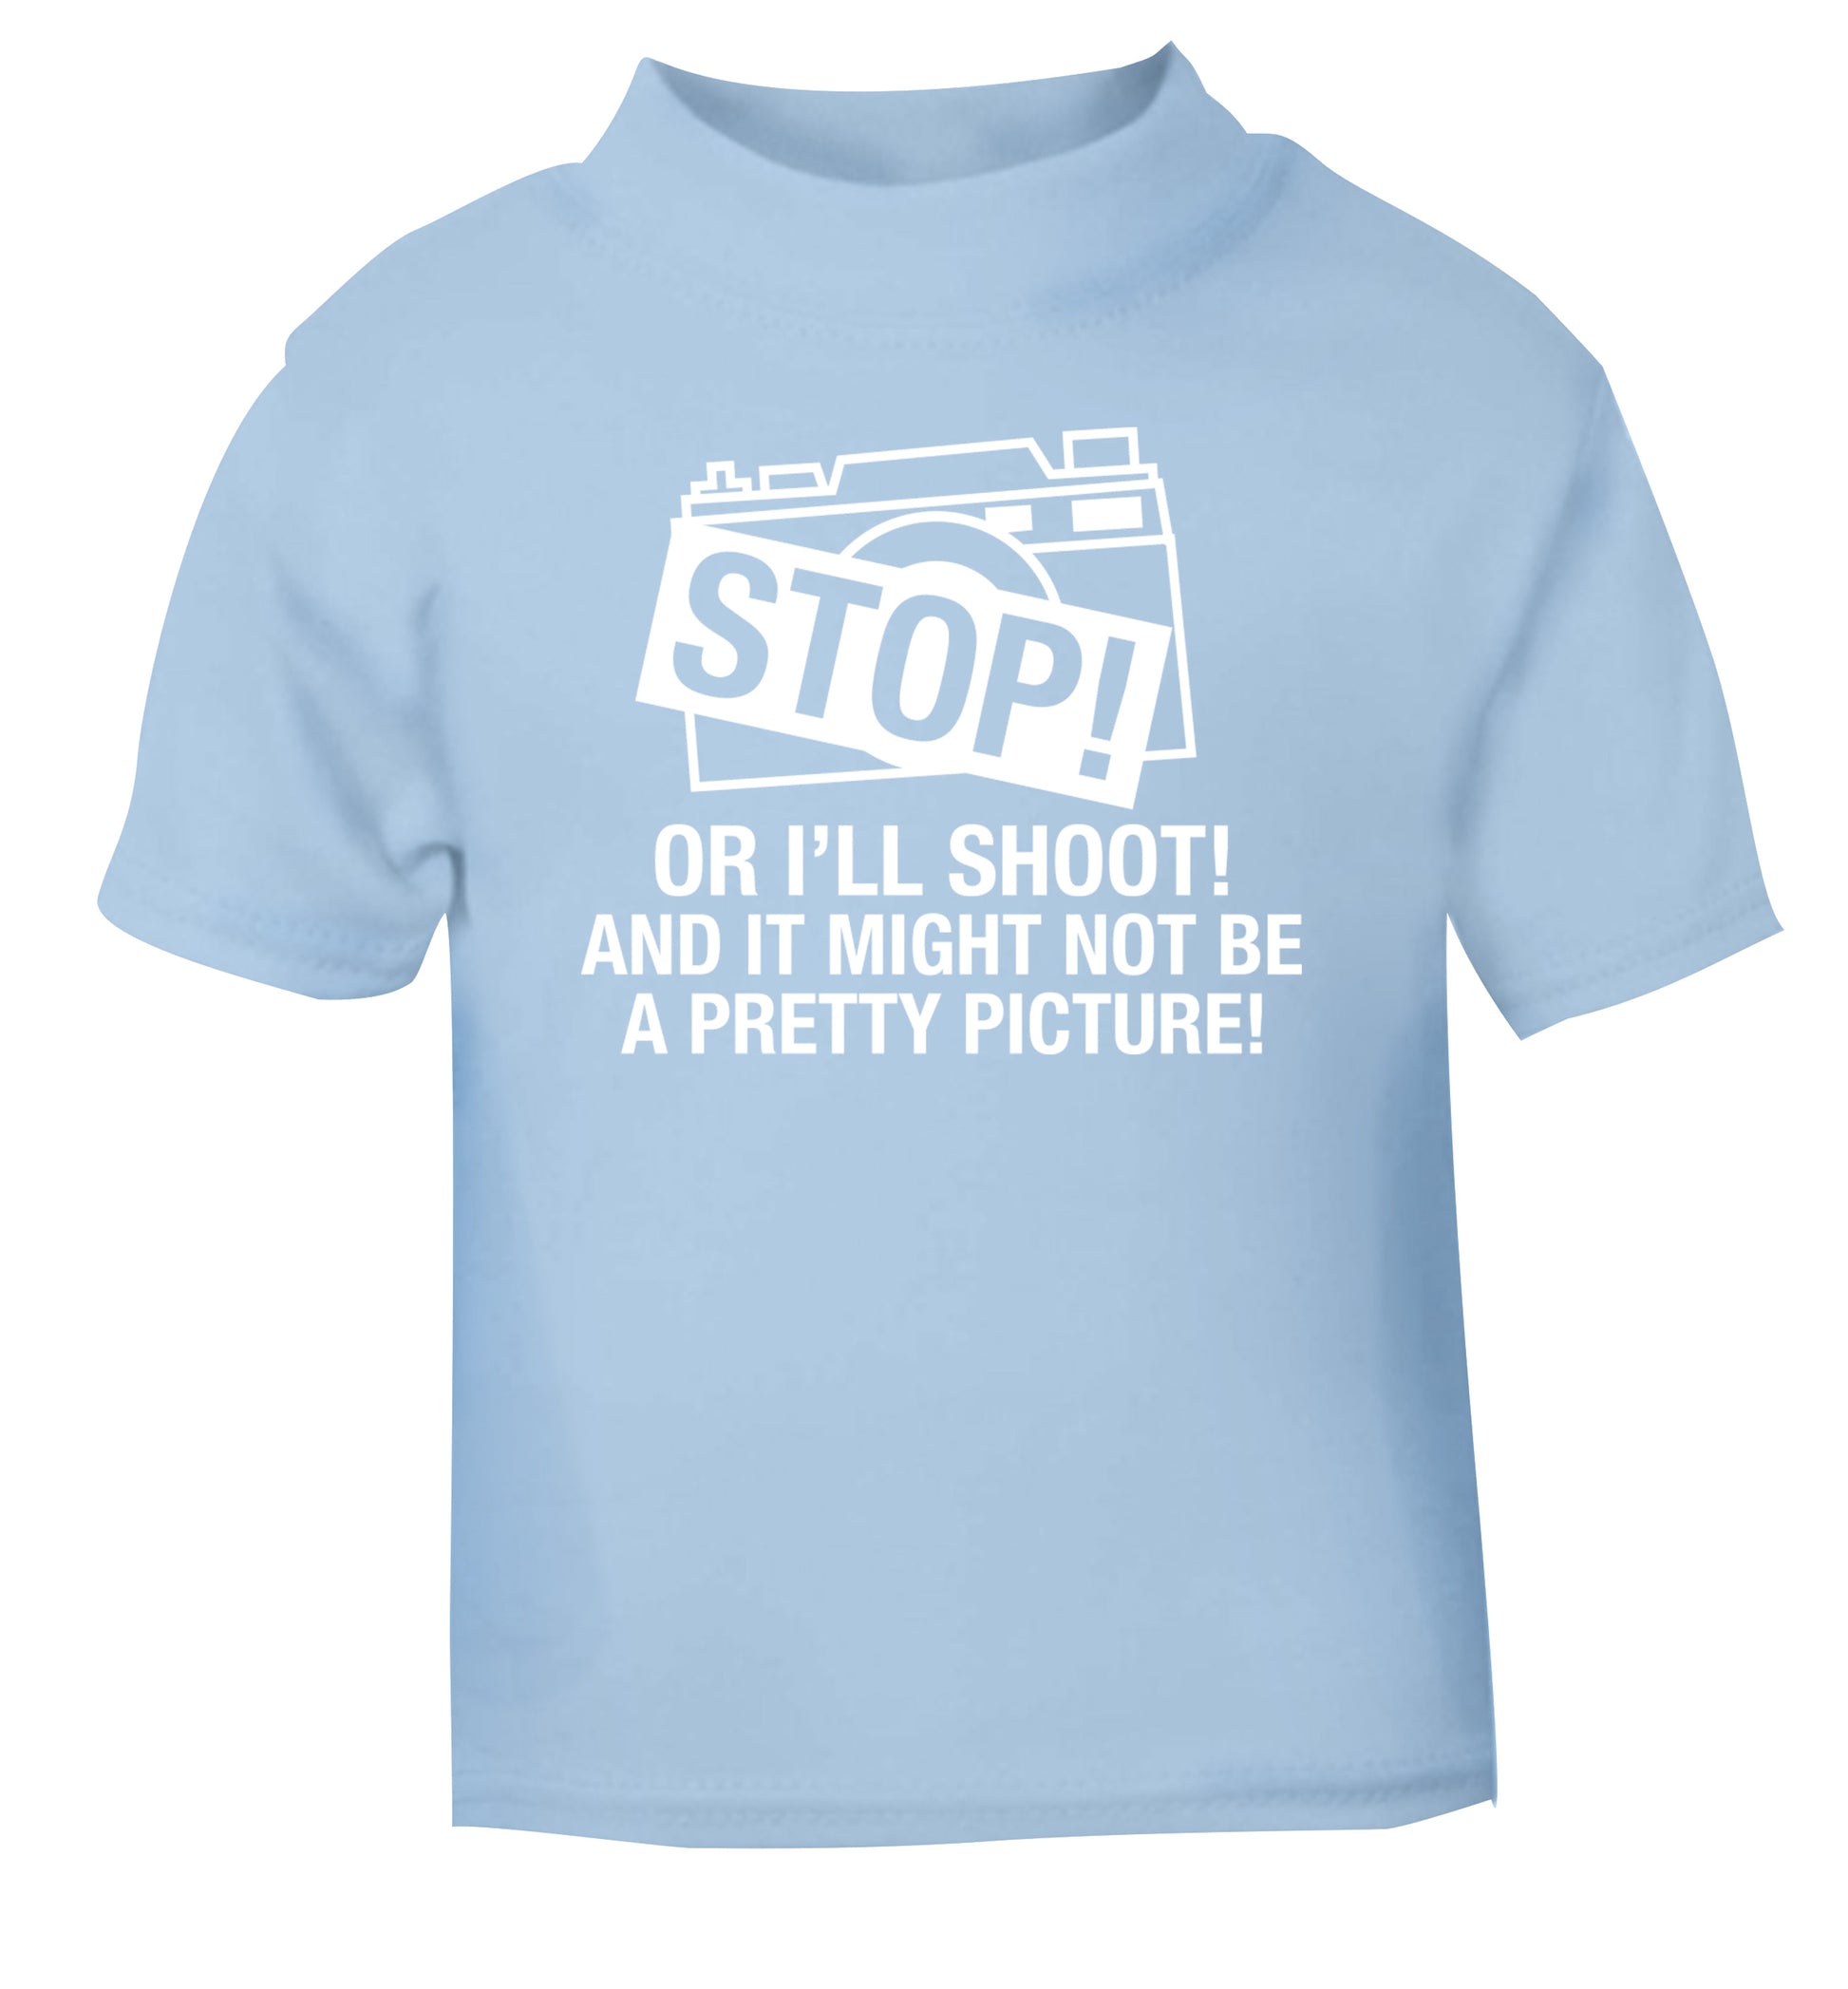 Stop or I'll shoot and it won't be a pretty picture light blue Baby Toddler Tshirt 2 Years